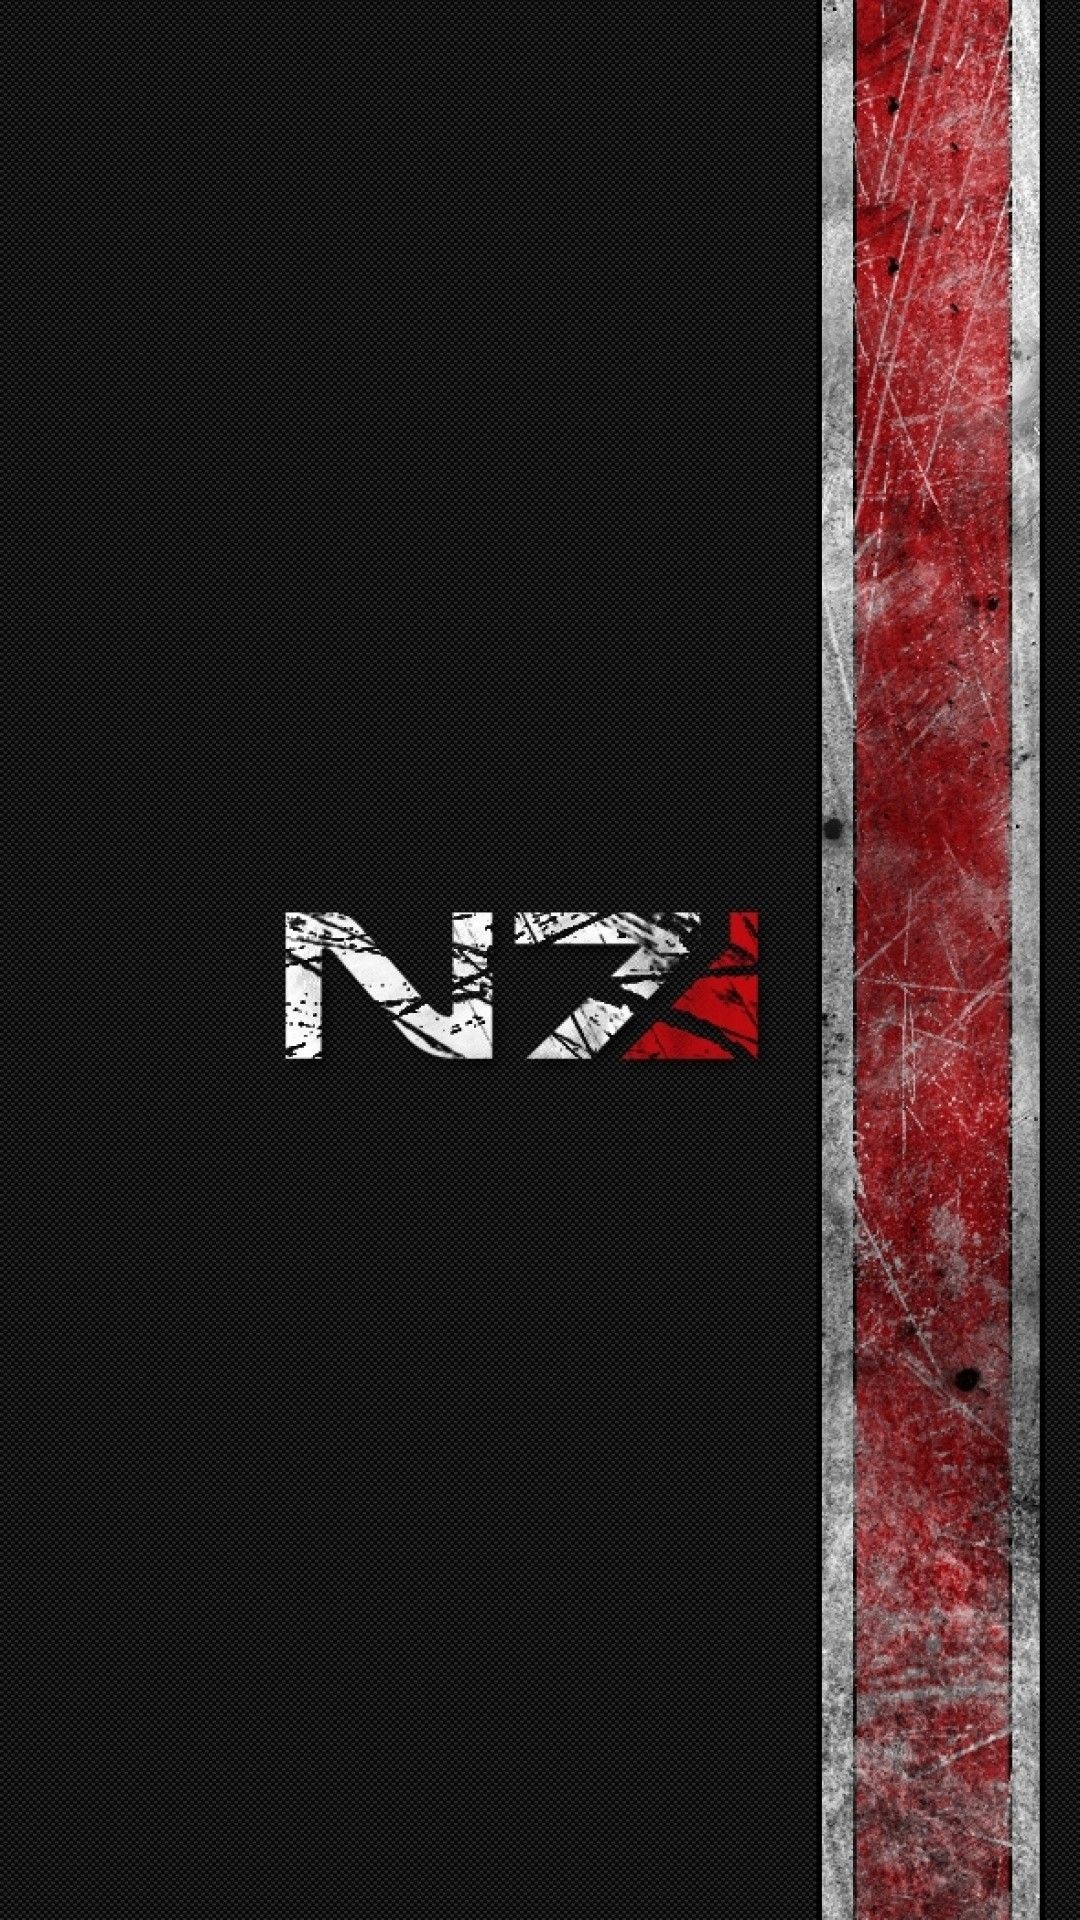 Mass Effect 3: Leviathan, Phone wallpapers, 1080x1920 Full HD Phone